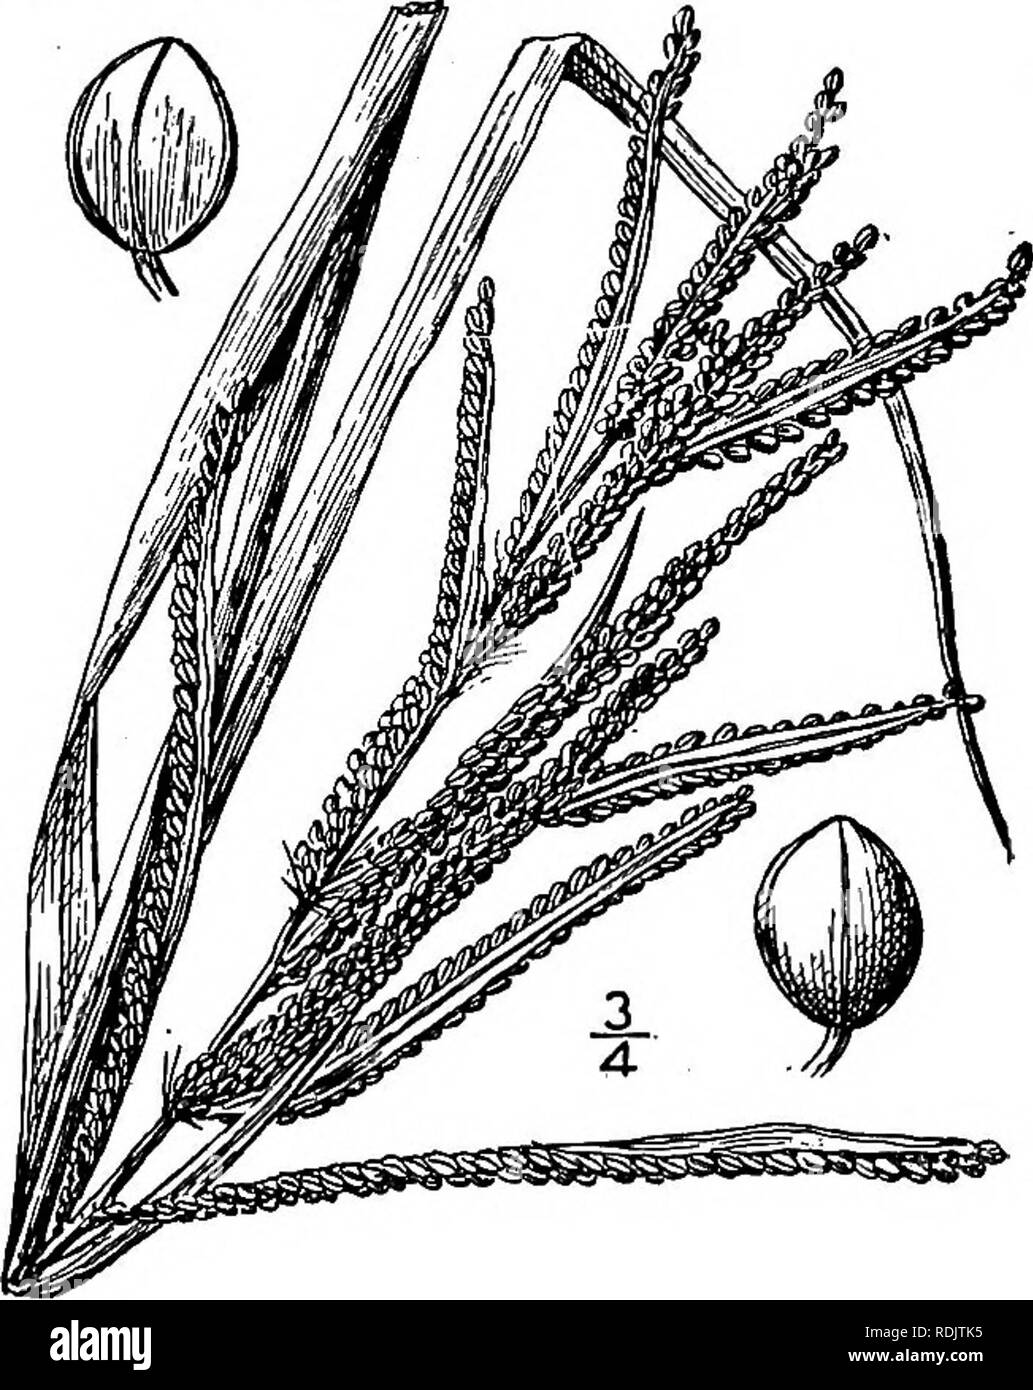 . An illustrated flora of the northern United States, Canada and the British possessions, from Newfoundland to the parallel of the southern boundary of Virginia, and from the Atlantic Ocean westward to the 102d meridian. Botany; Botany. 15. Paspalum laeviglume Scribn. Smooth- scaled Paspalum. Fig. 302. Paspalum remotum glabrum Vasey, Bull. Torrey Club 13: 166. 1886. Not P. glabrum Poir. 1804. Paspalum pubiflorum glabrum Vasey; Scribn. Bull. Tenn. Exp. Sta. 7: 32. 1894. Paspalum laeviglume Scribn.; Nash, in Small, Fl. SE. U. S. 75- 1903- A stout glabrous perennial, usually rooting at the lower  Stock Photo